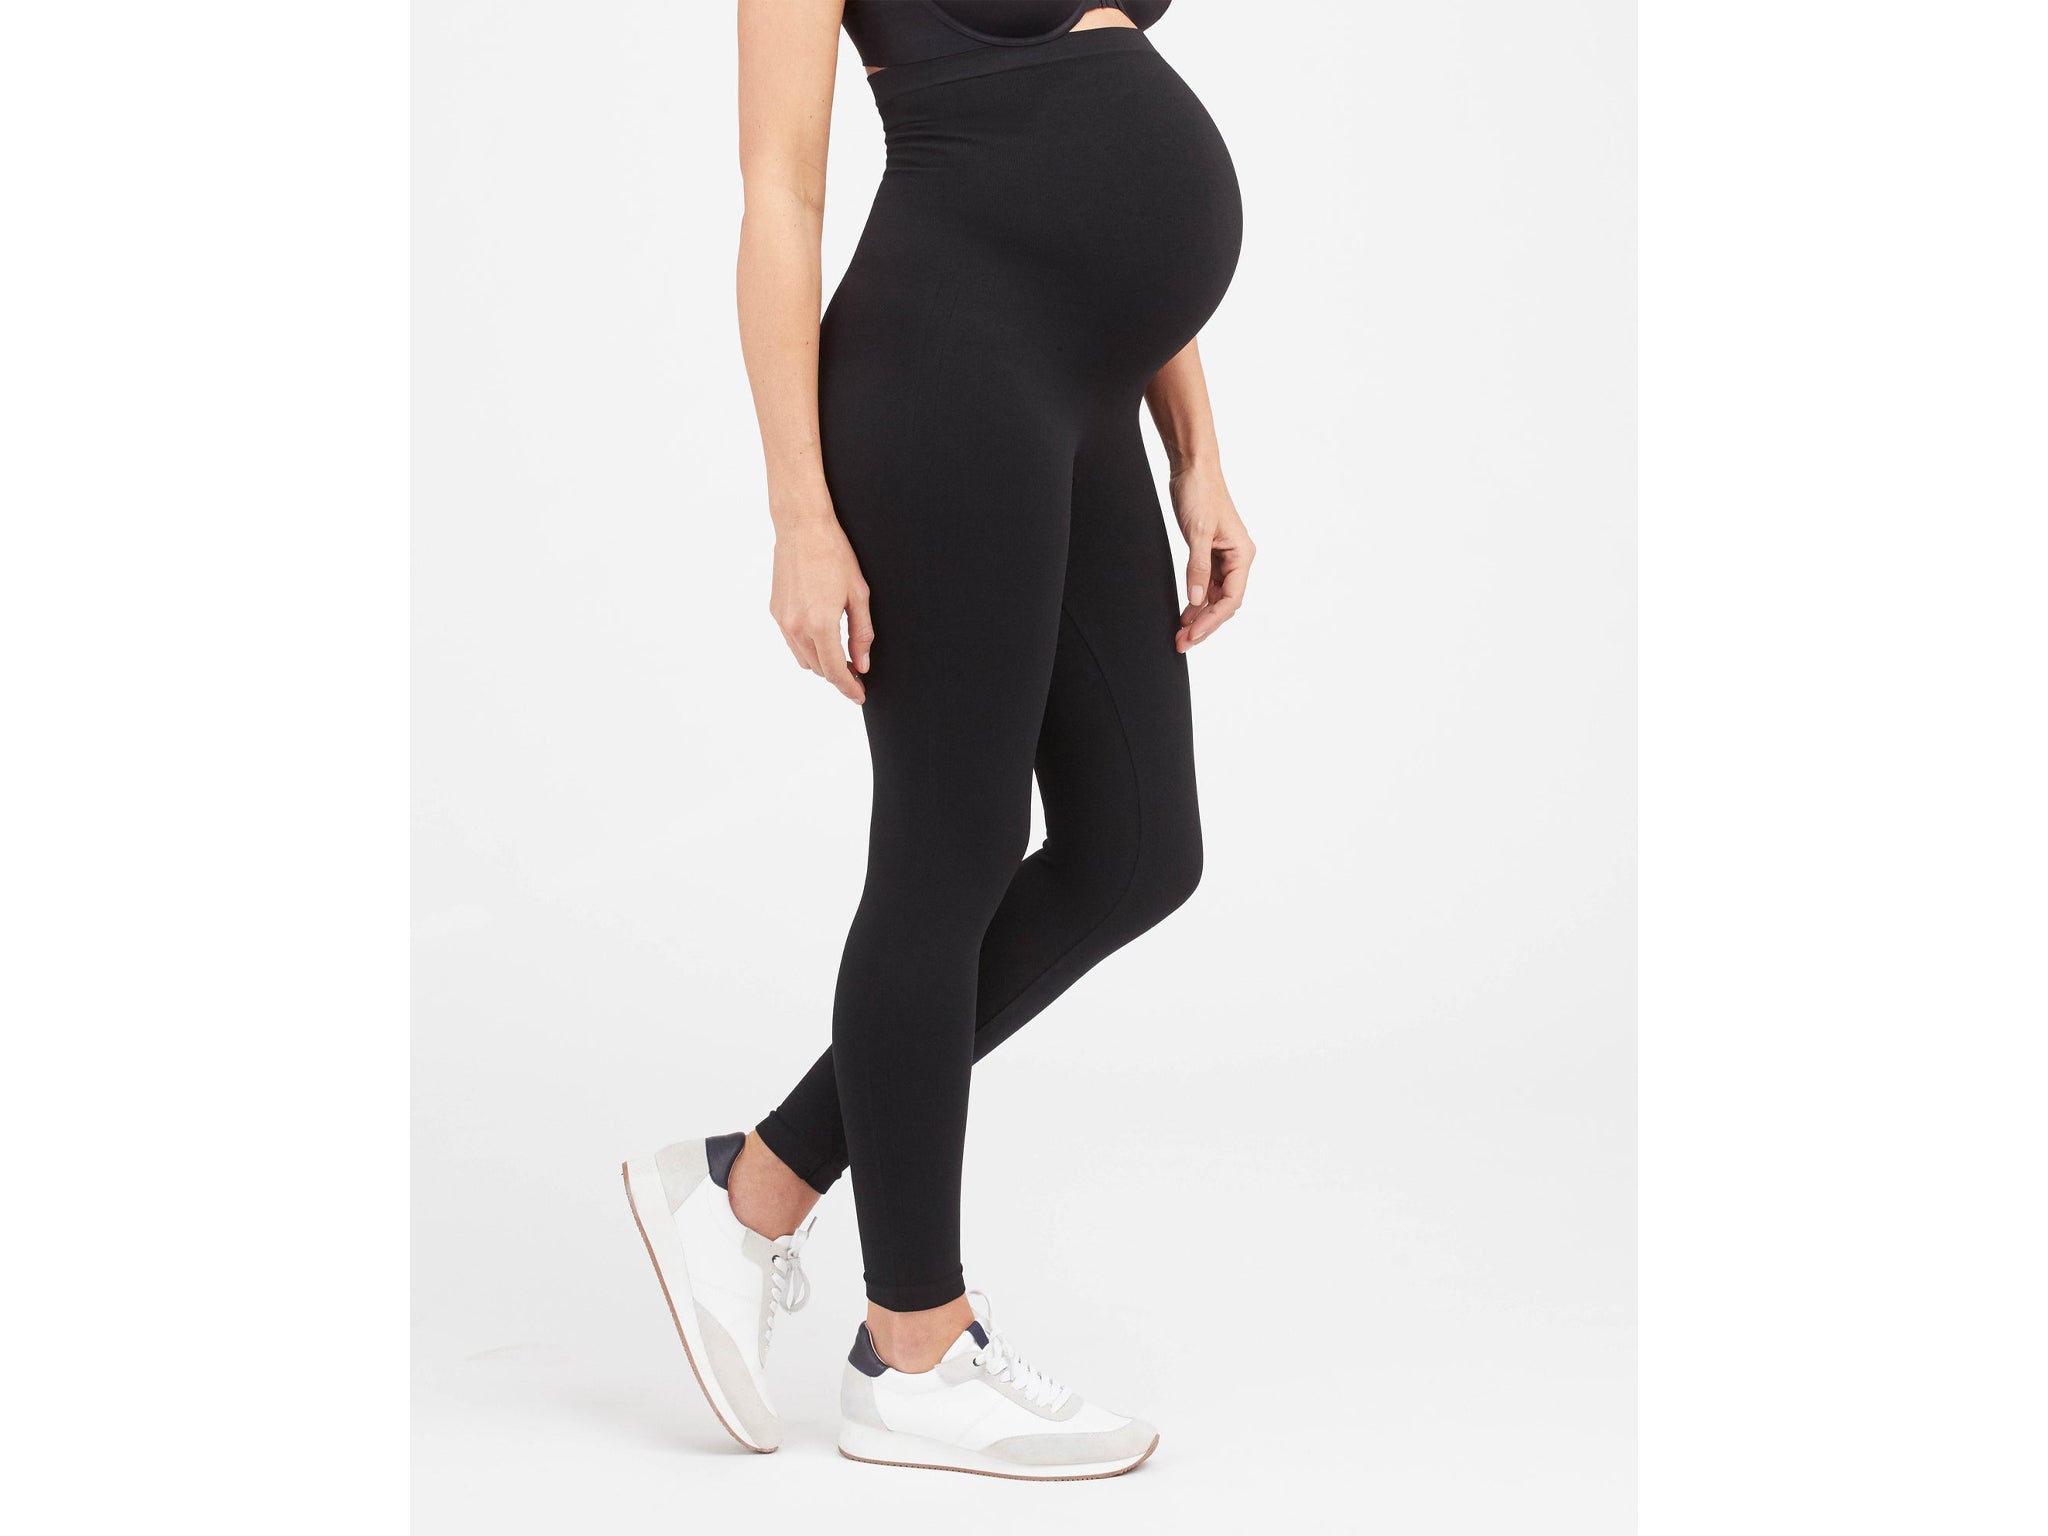 Leading Lady Seamless Black Maternity Leggings - Extra Support